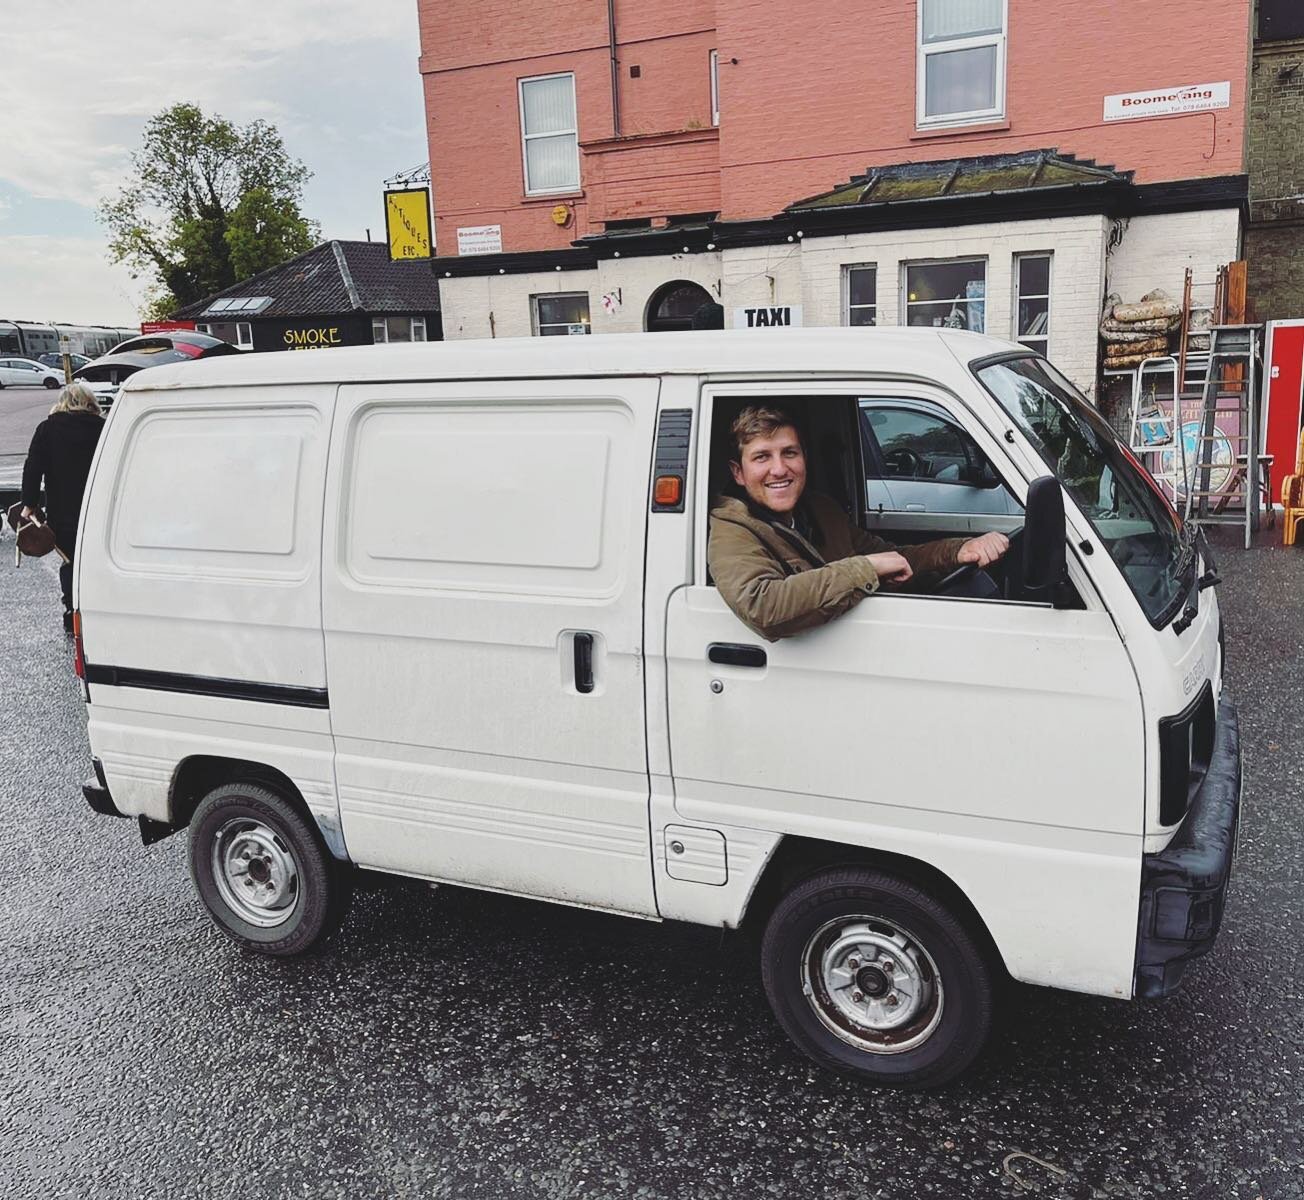 A warm welcome to our newest member of the team! This is Brian (the van). Soon to be a grilled cheese, beer &amp; coffee truck (the three basic food groups 🙄) coming to an event or market near you. 

It needs work but it&rsquo;s bones are in excelle